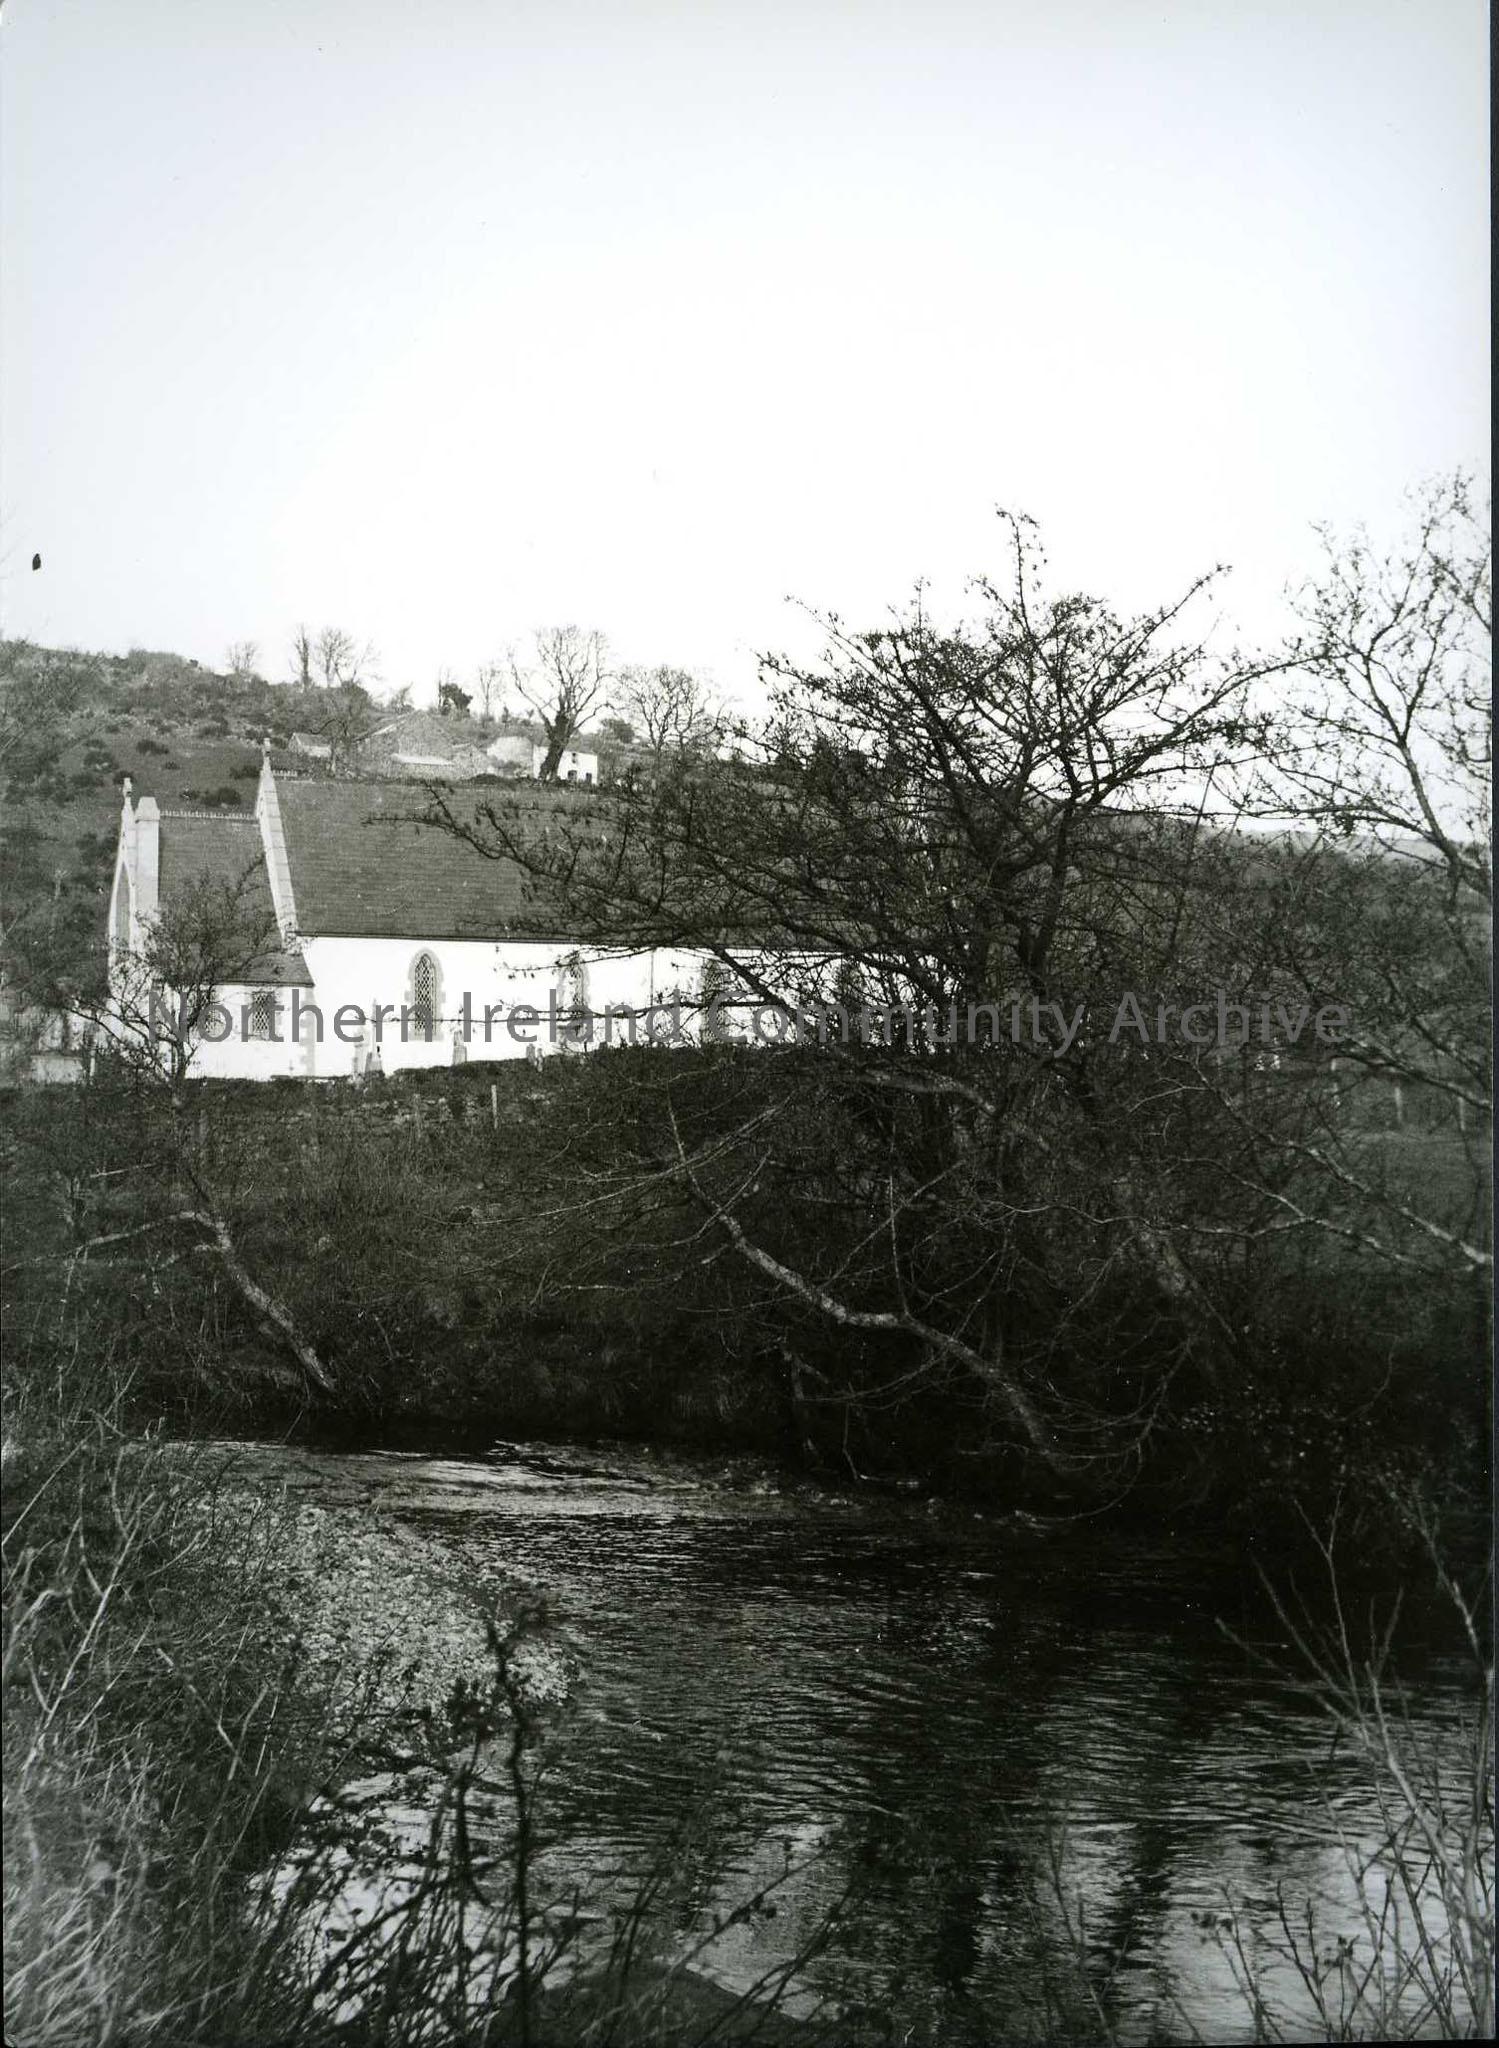 Printed black and white photograph – River and trees in the foreground with a Church behind.